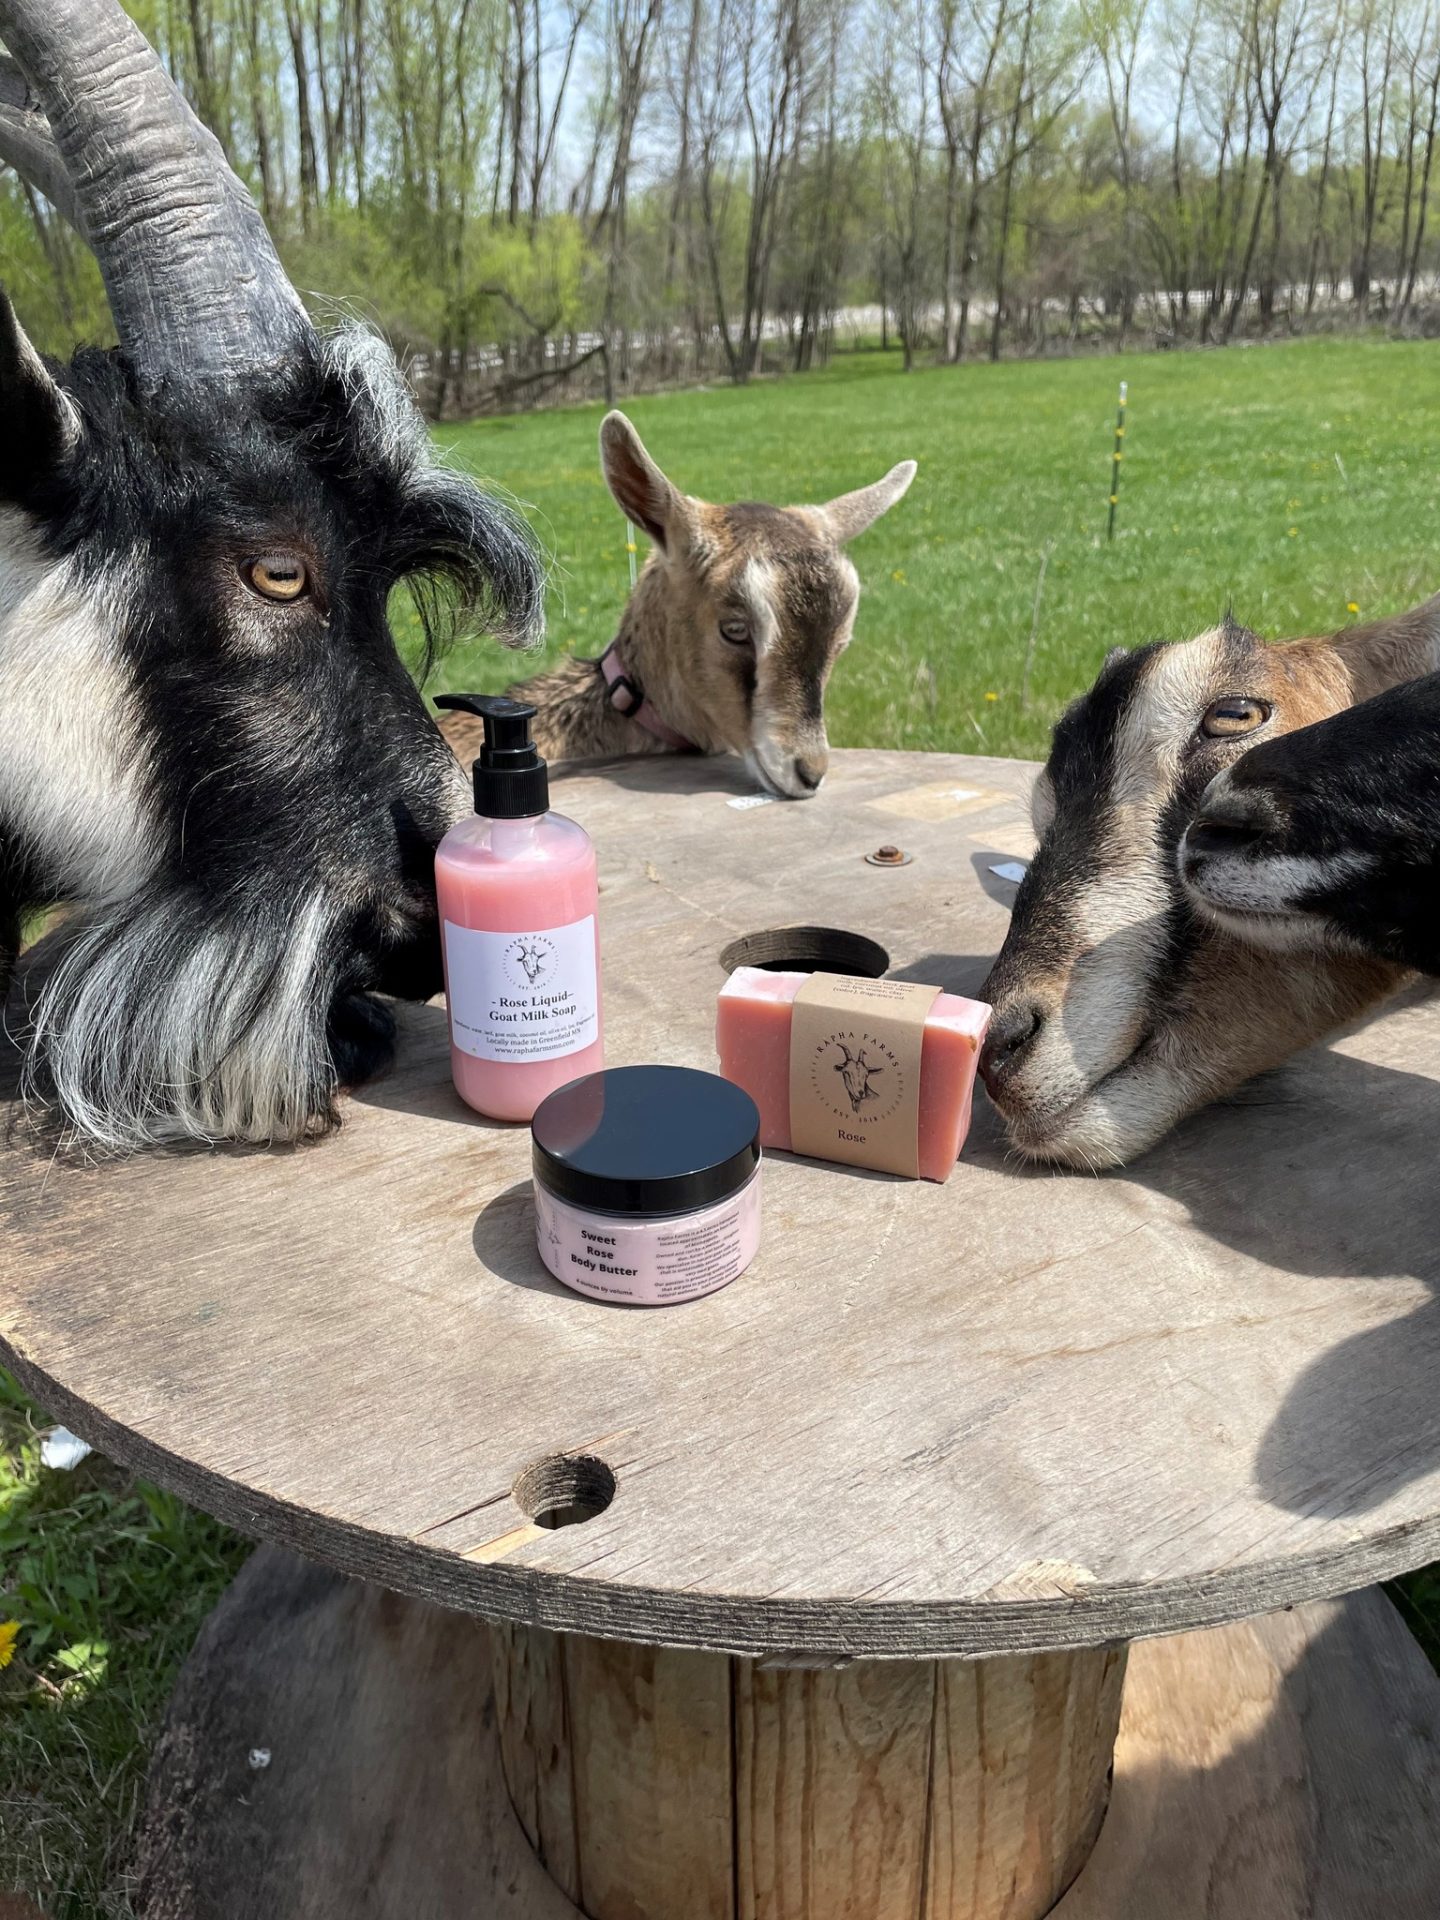 Goats sniffing at a selection of body care products.